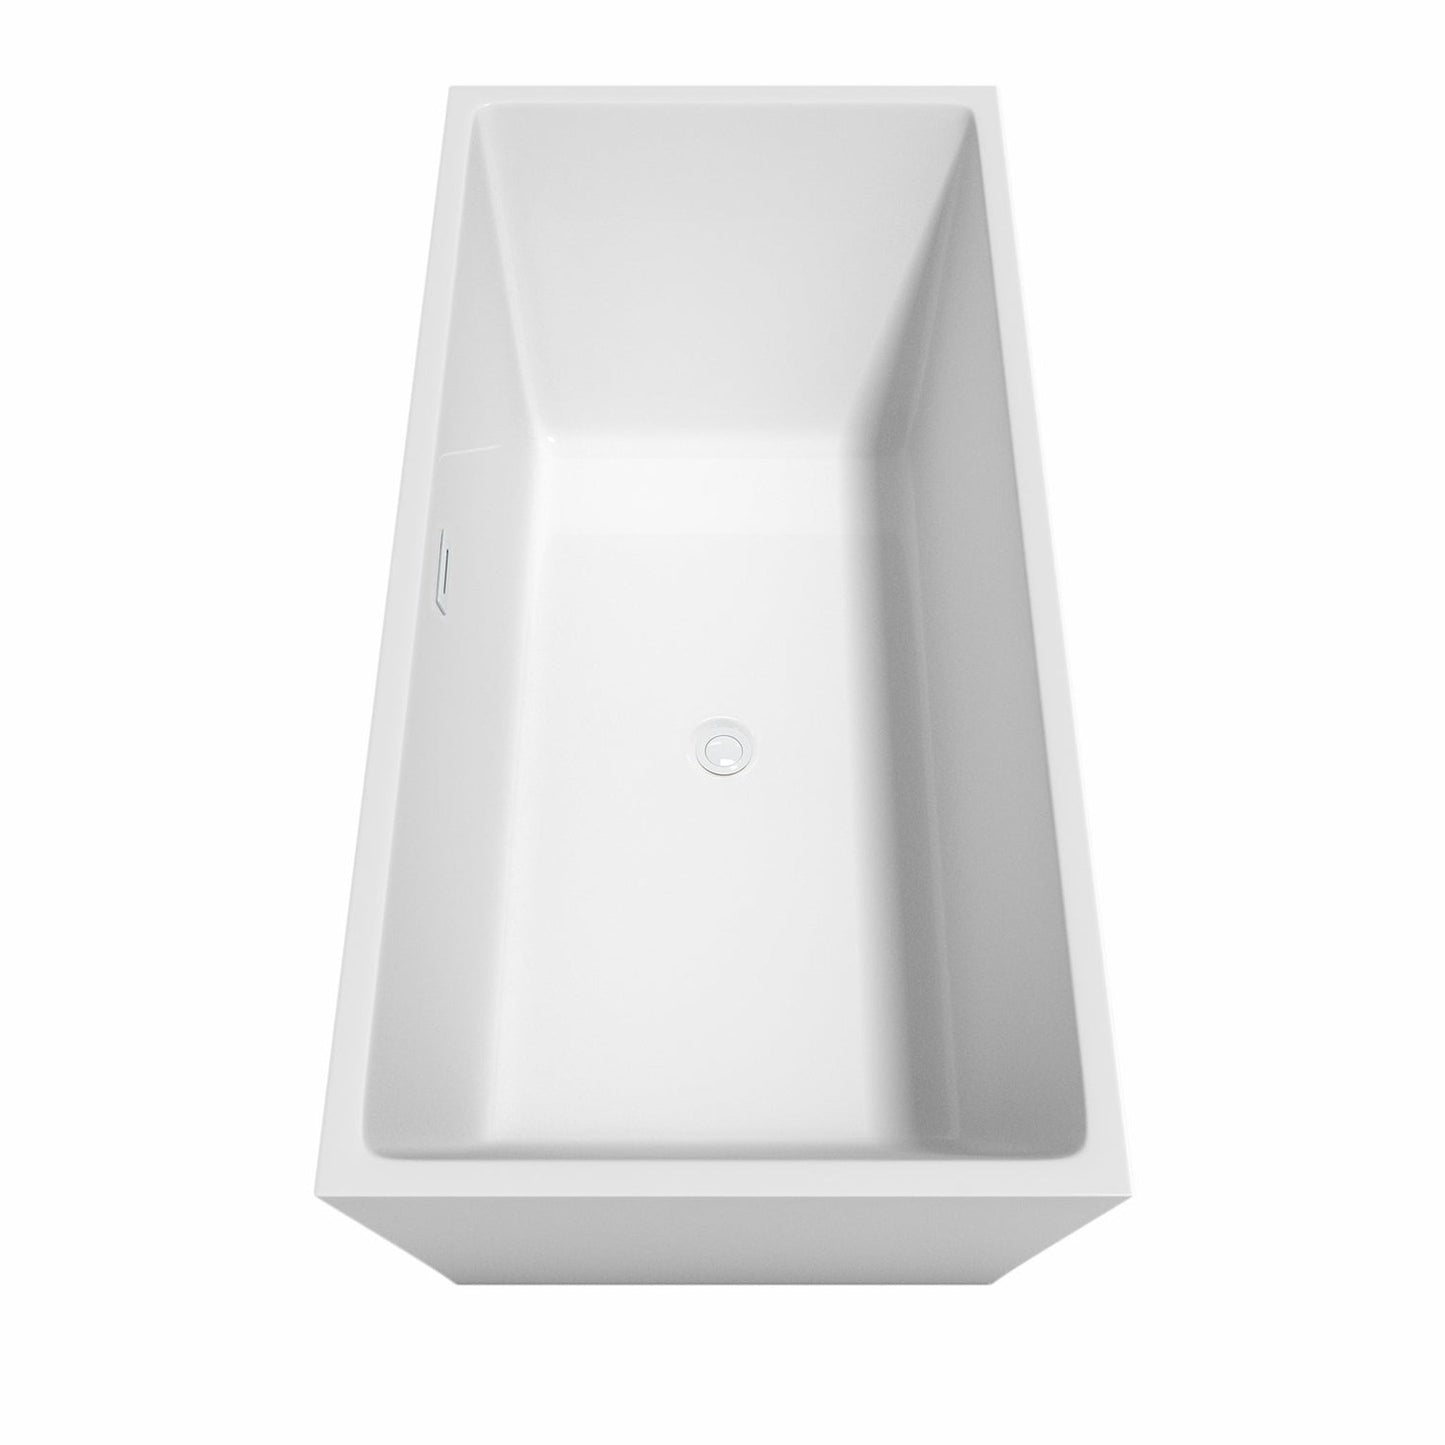 Wyndham Collection Sara 67" Freestanding Bathtub in White With Shiny White Trim and Floor Mounted Faucet in Matte Black